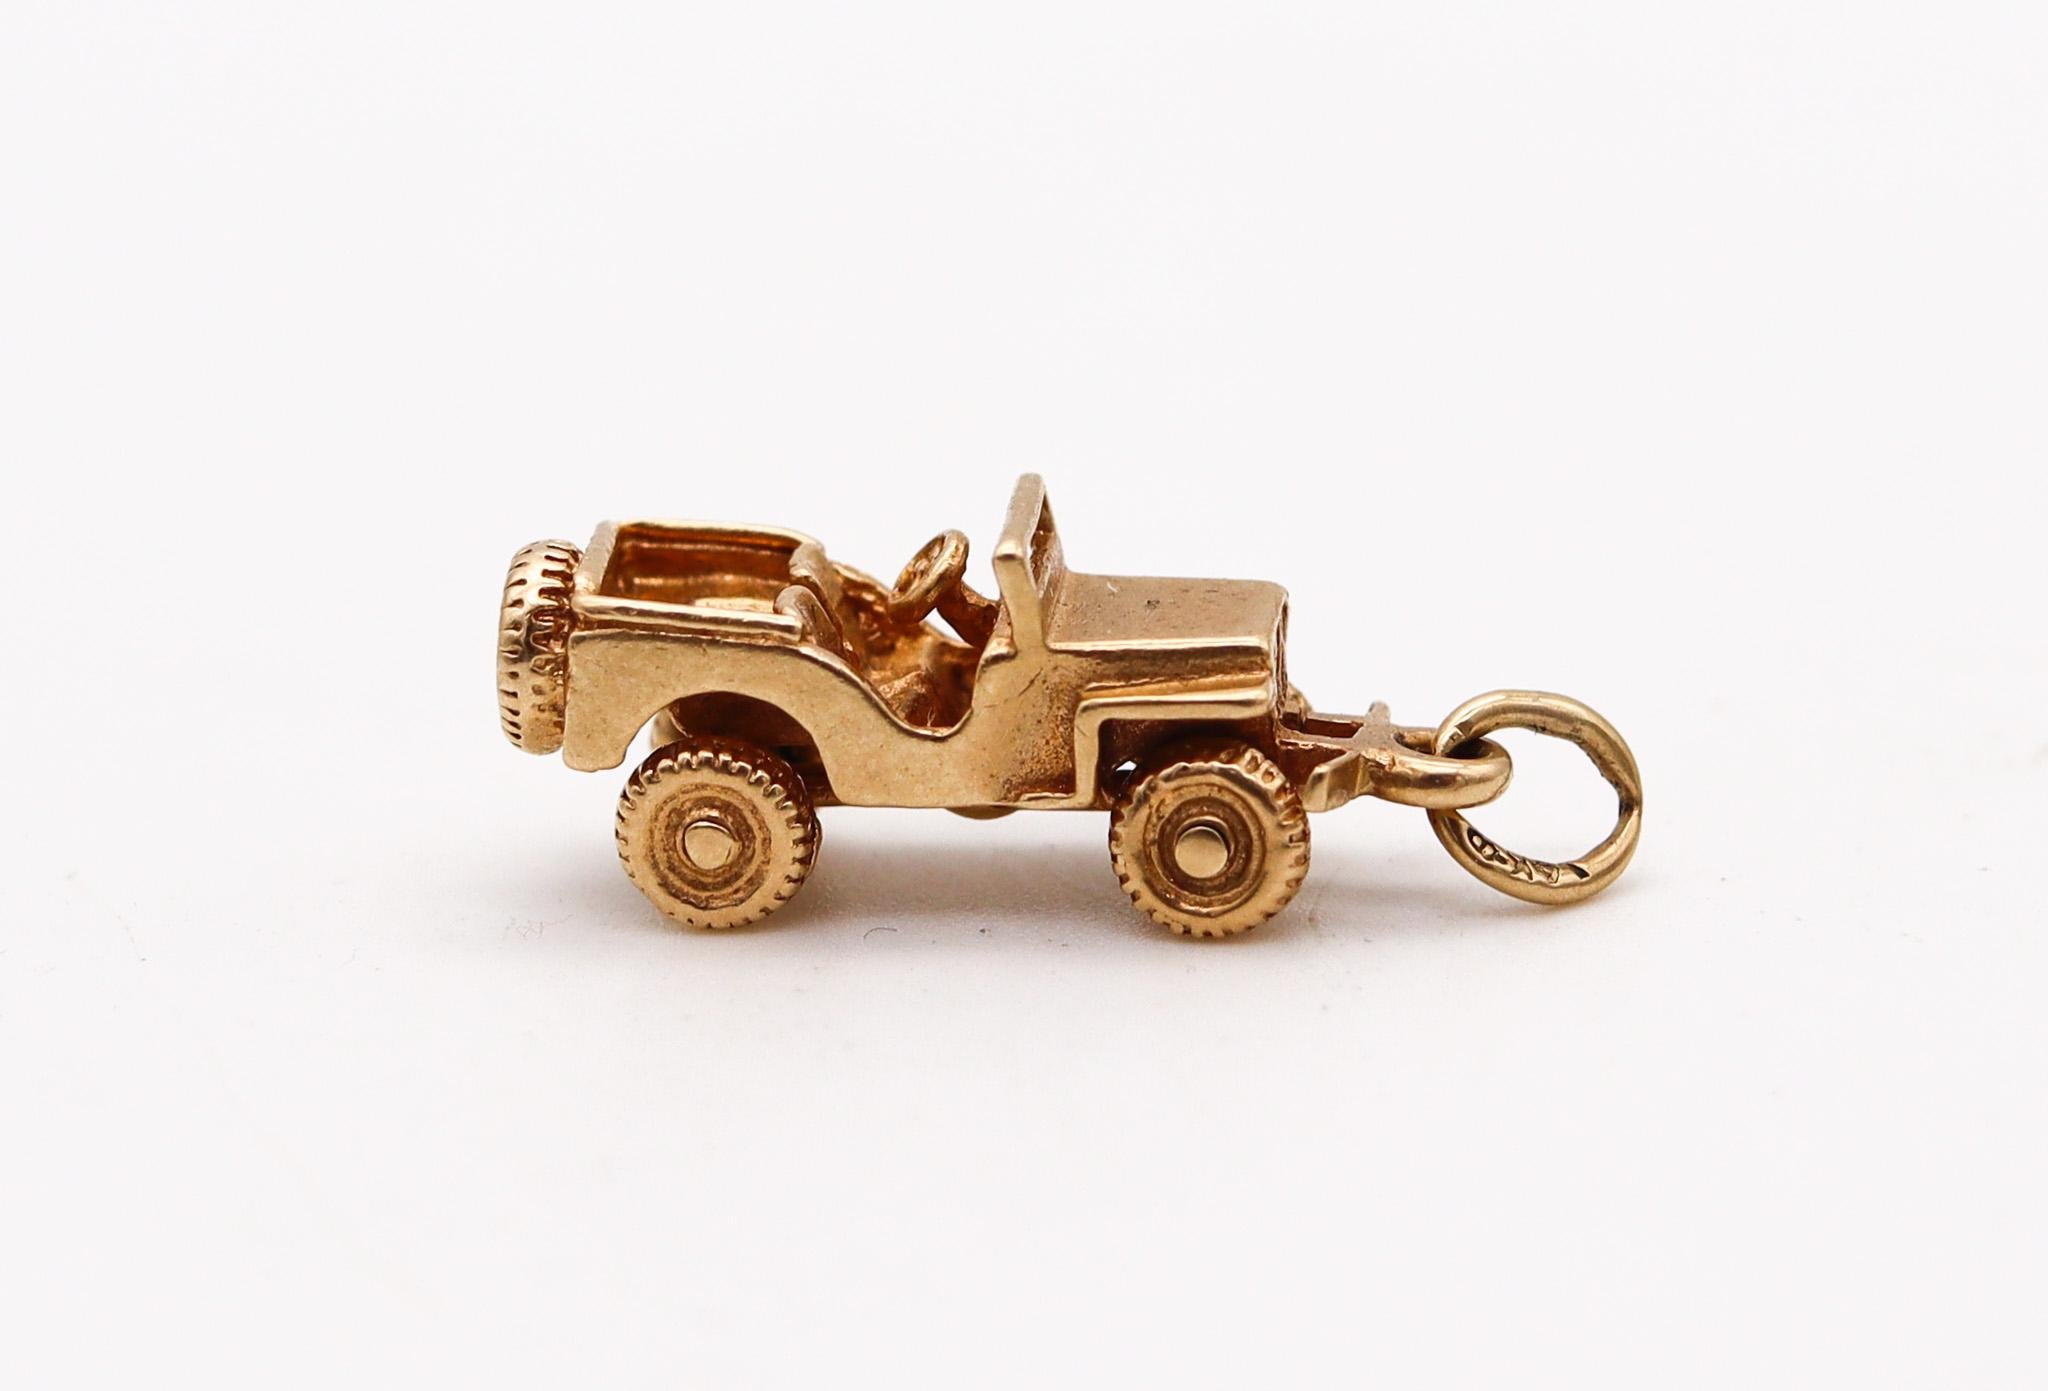 A miniature jeep pendant-charm.

Beautiful and very well detailed pendant-charm made in the shape of a jeep truck. The charm was created during the art deco-retro periods back in the 1940 with very nice movable details, such the four wheels. It was